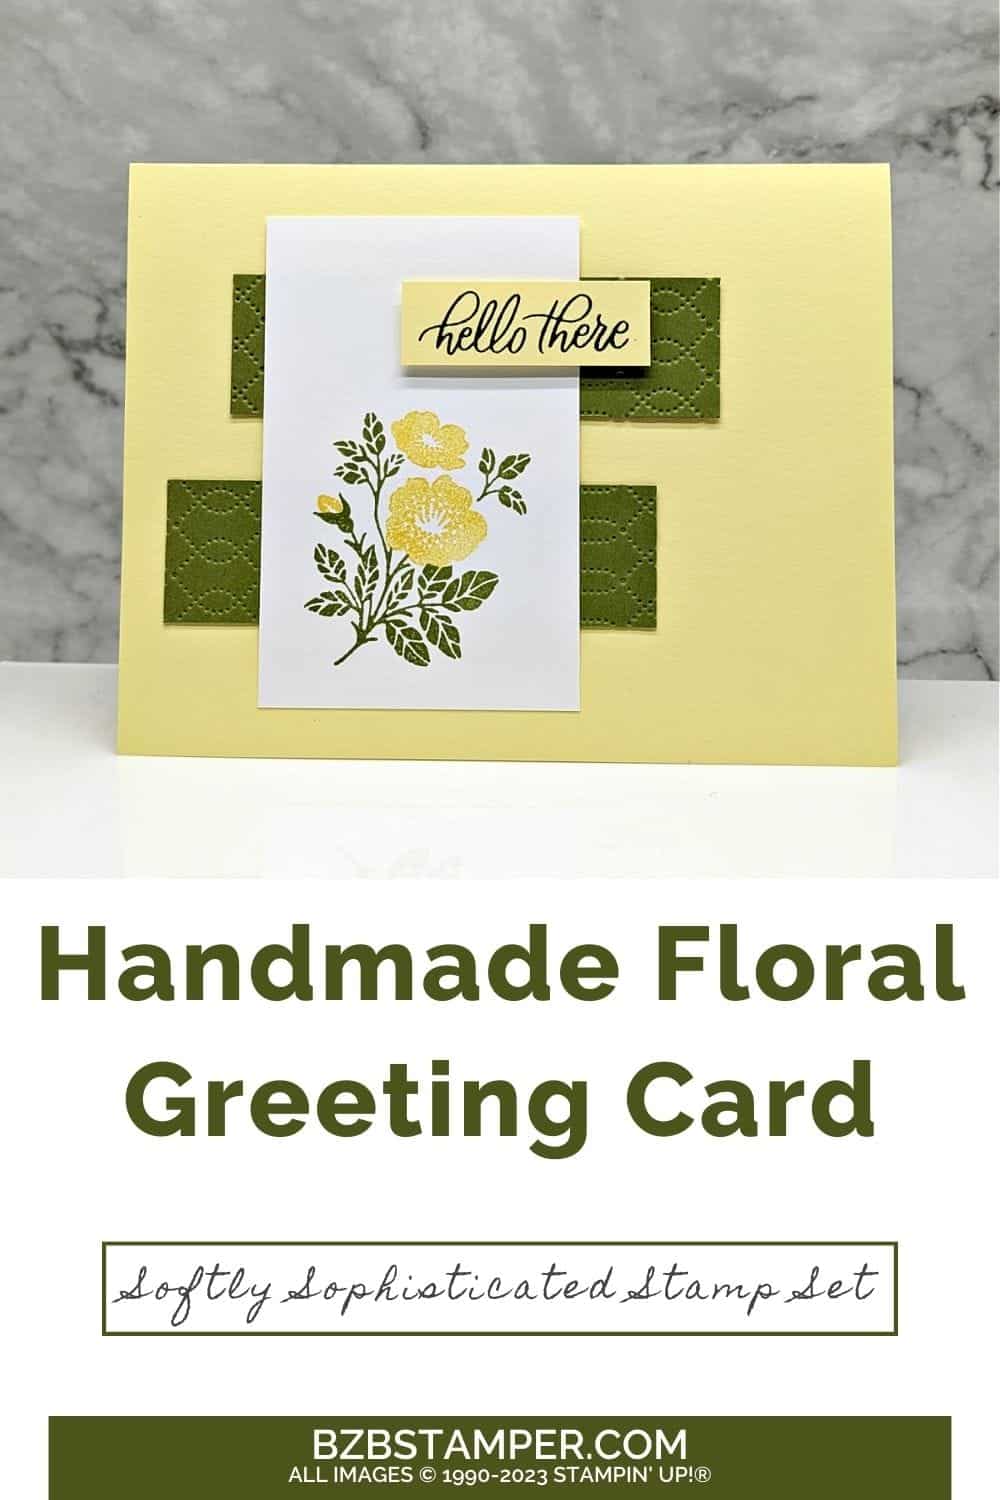 Handmade Card using the Softly Sophisticated Stamp Set in yellow and green with Hello There sentiment and yellow flower.